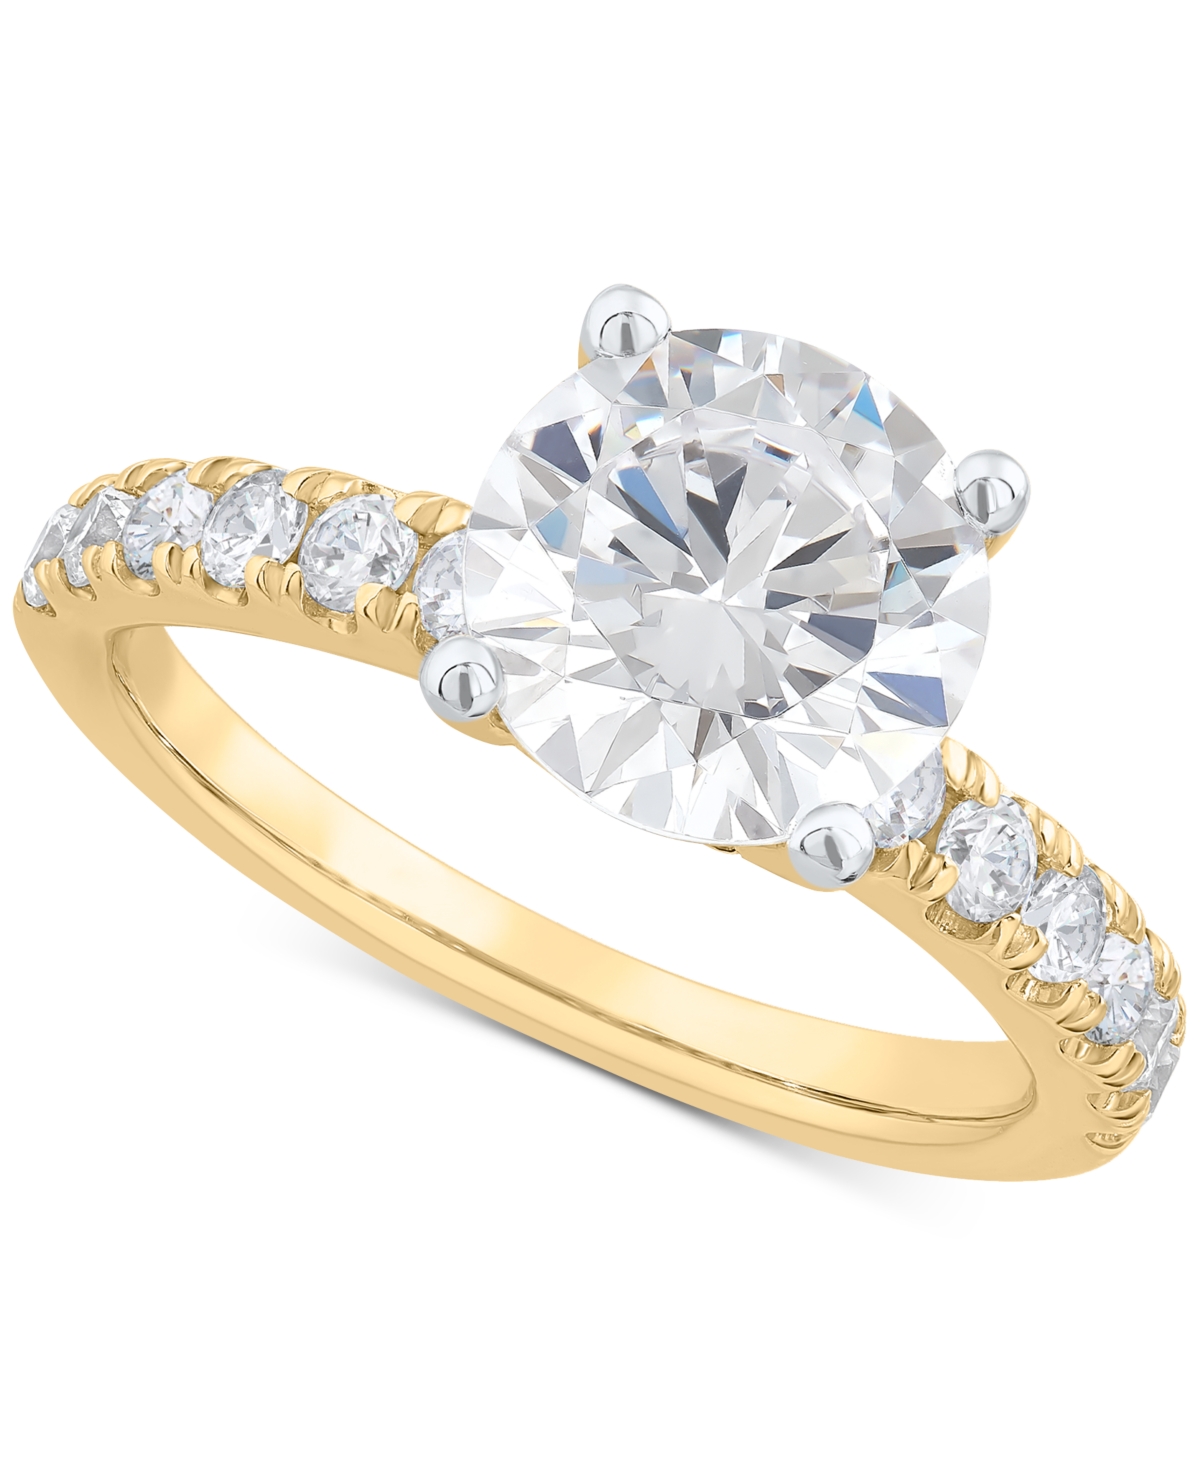 Grown With Love Igi Certified Lab Grown Diamond Engagement Ring (3 ct. t.w.) in 14k White Gold or 14k Gold & White Gold